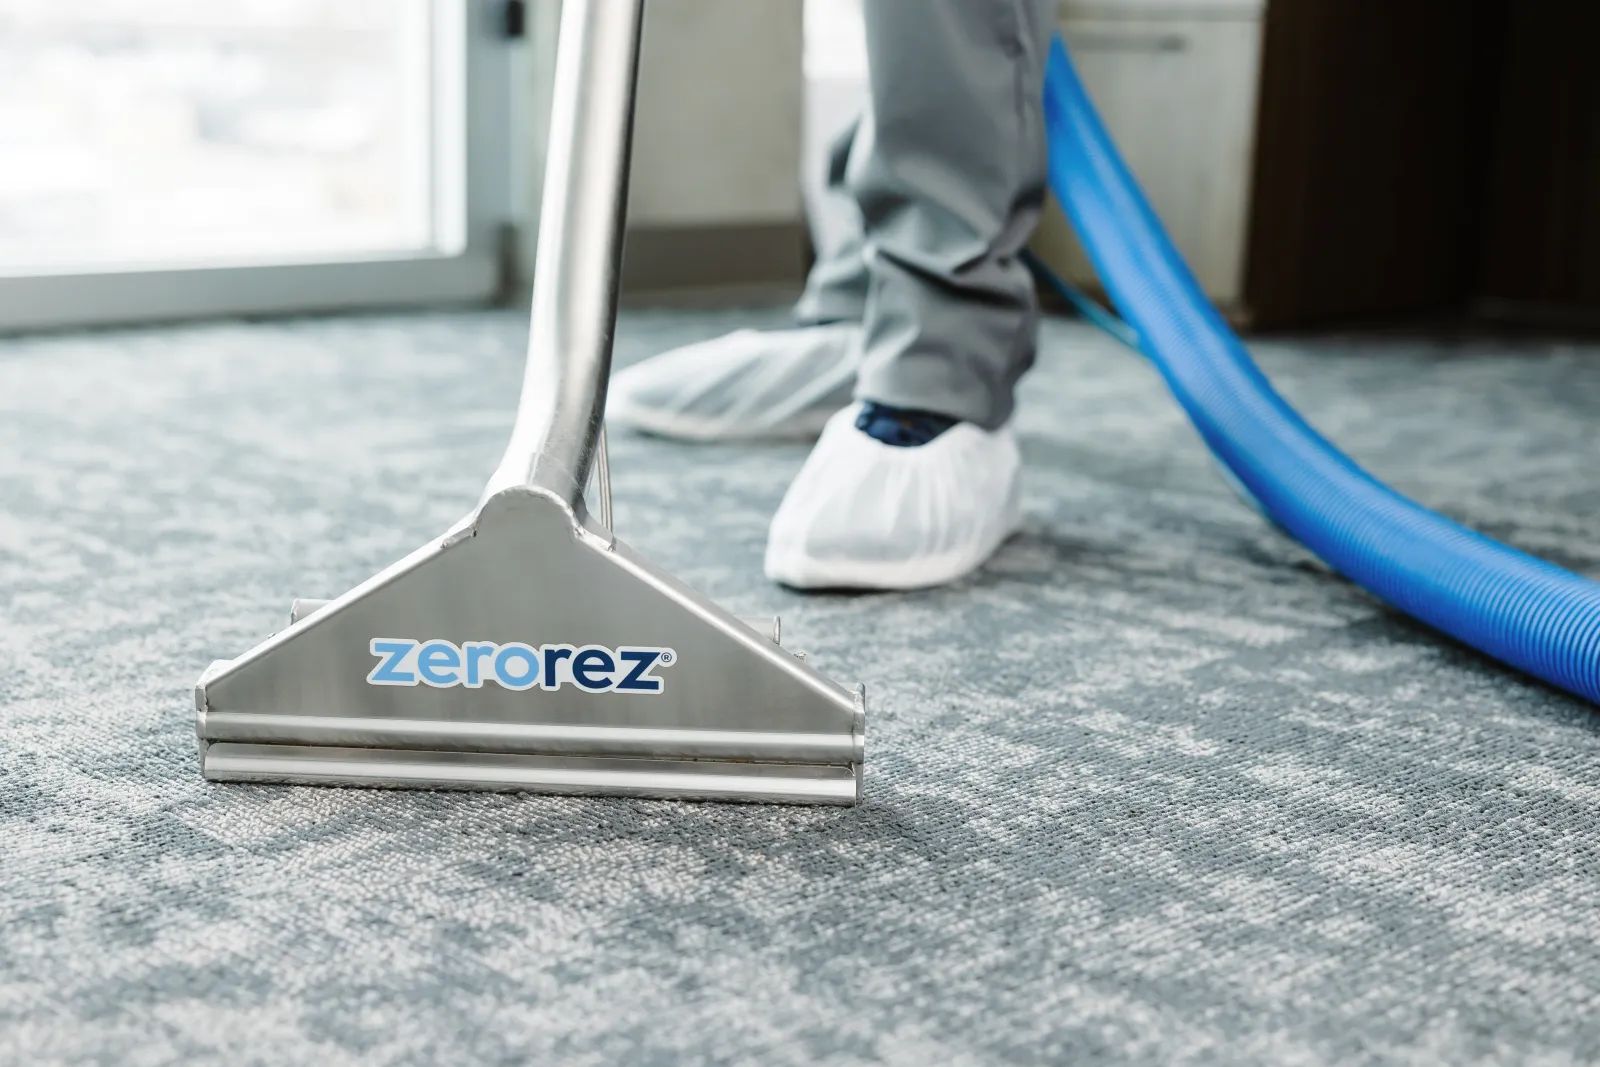 Zerorez® Zr Wand extracting and cleaning Berber carpets in a commercial office building